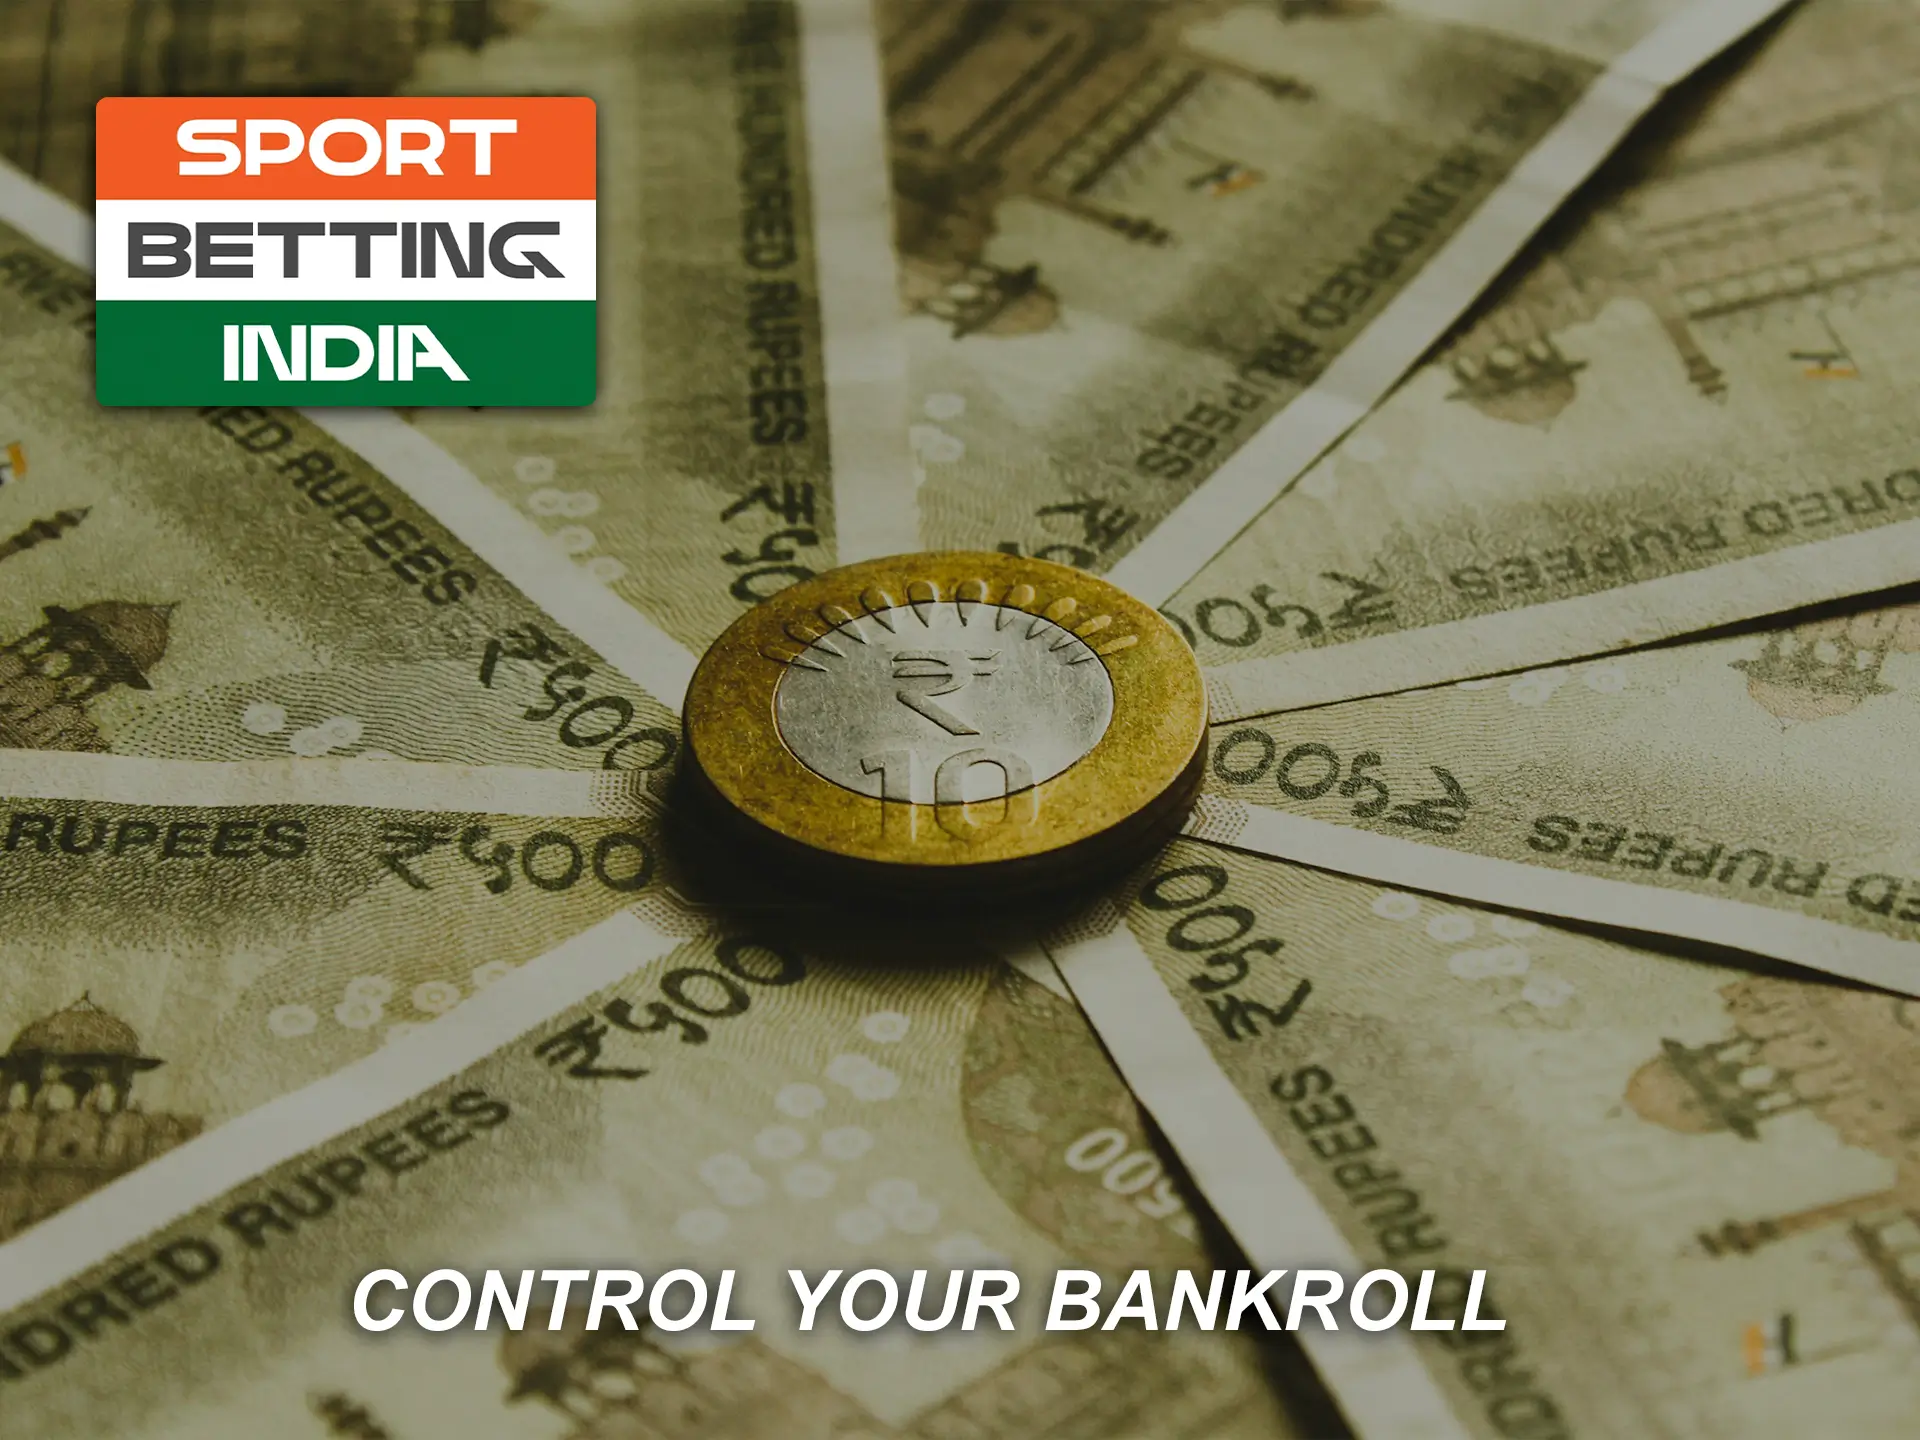 Don't forget to monitor your expenses and income when betting on football.